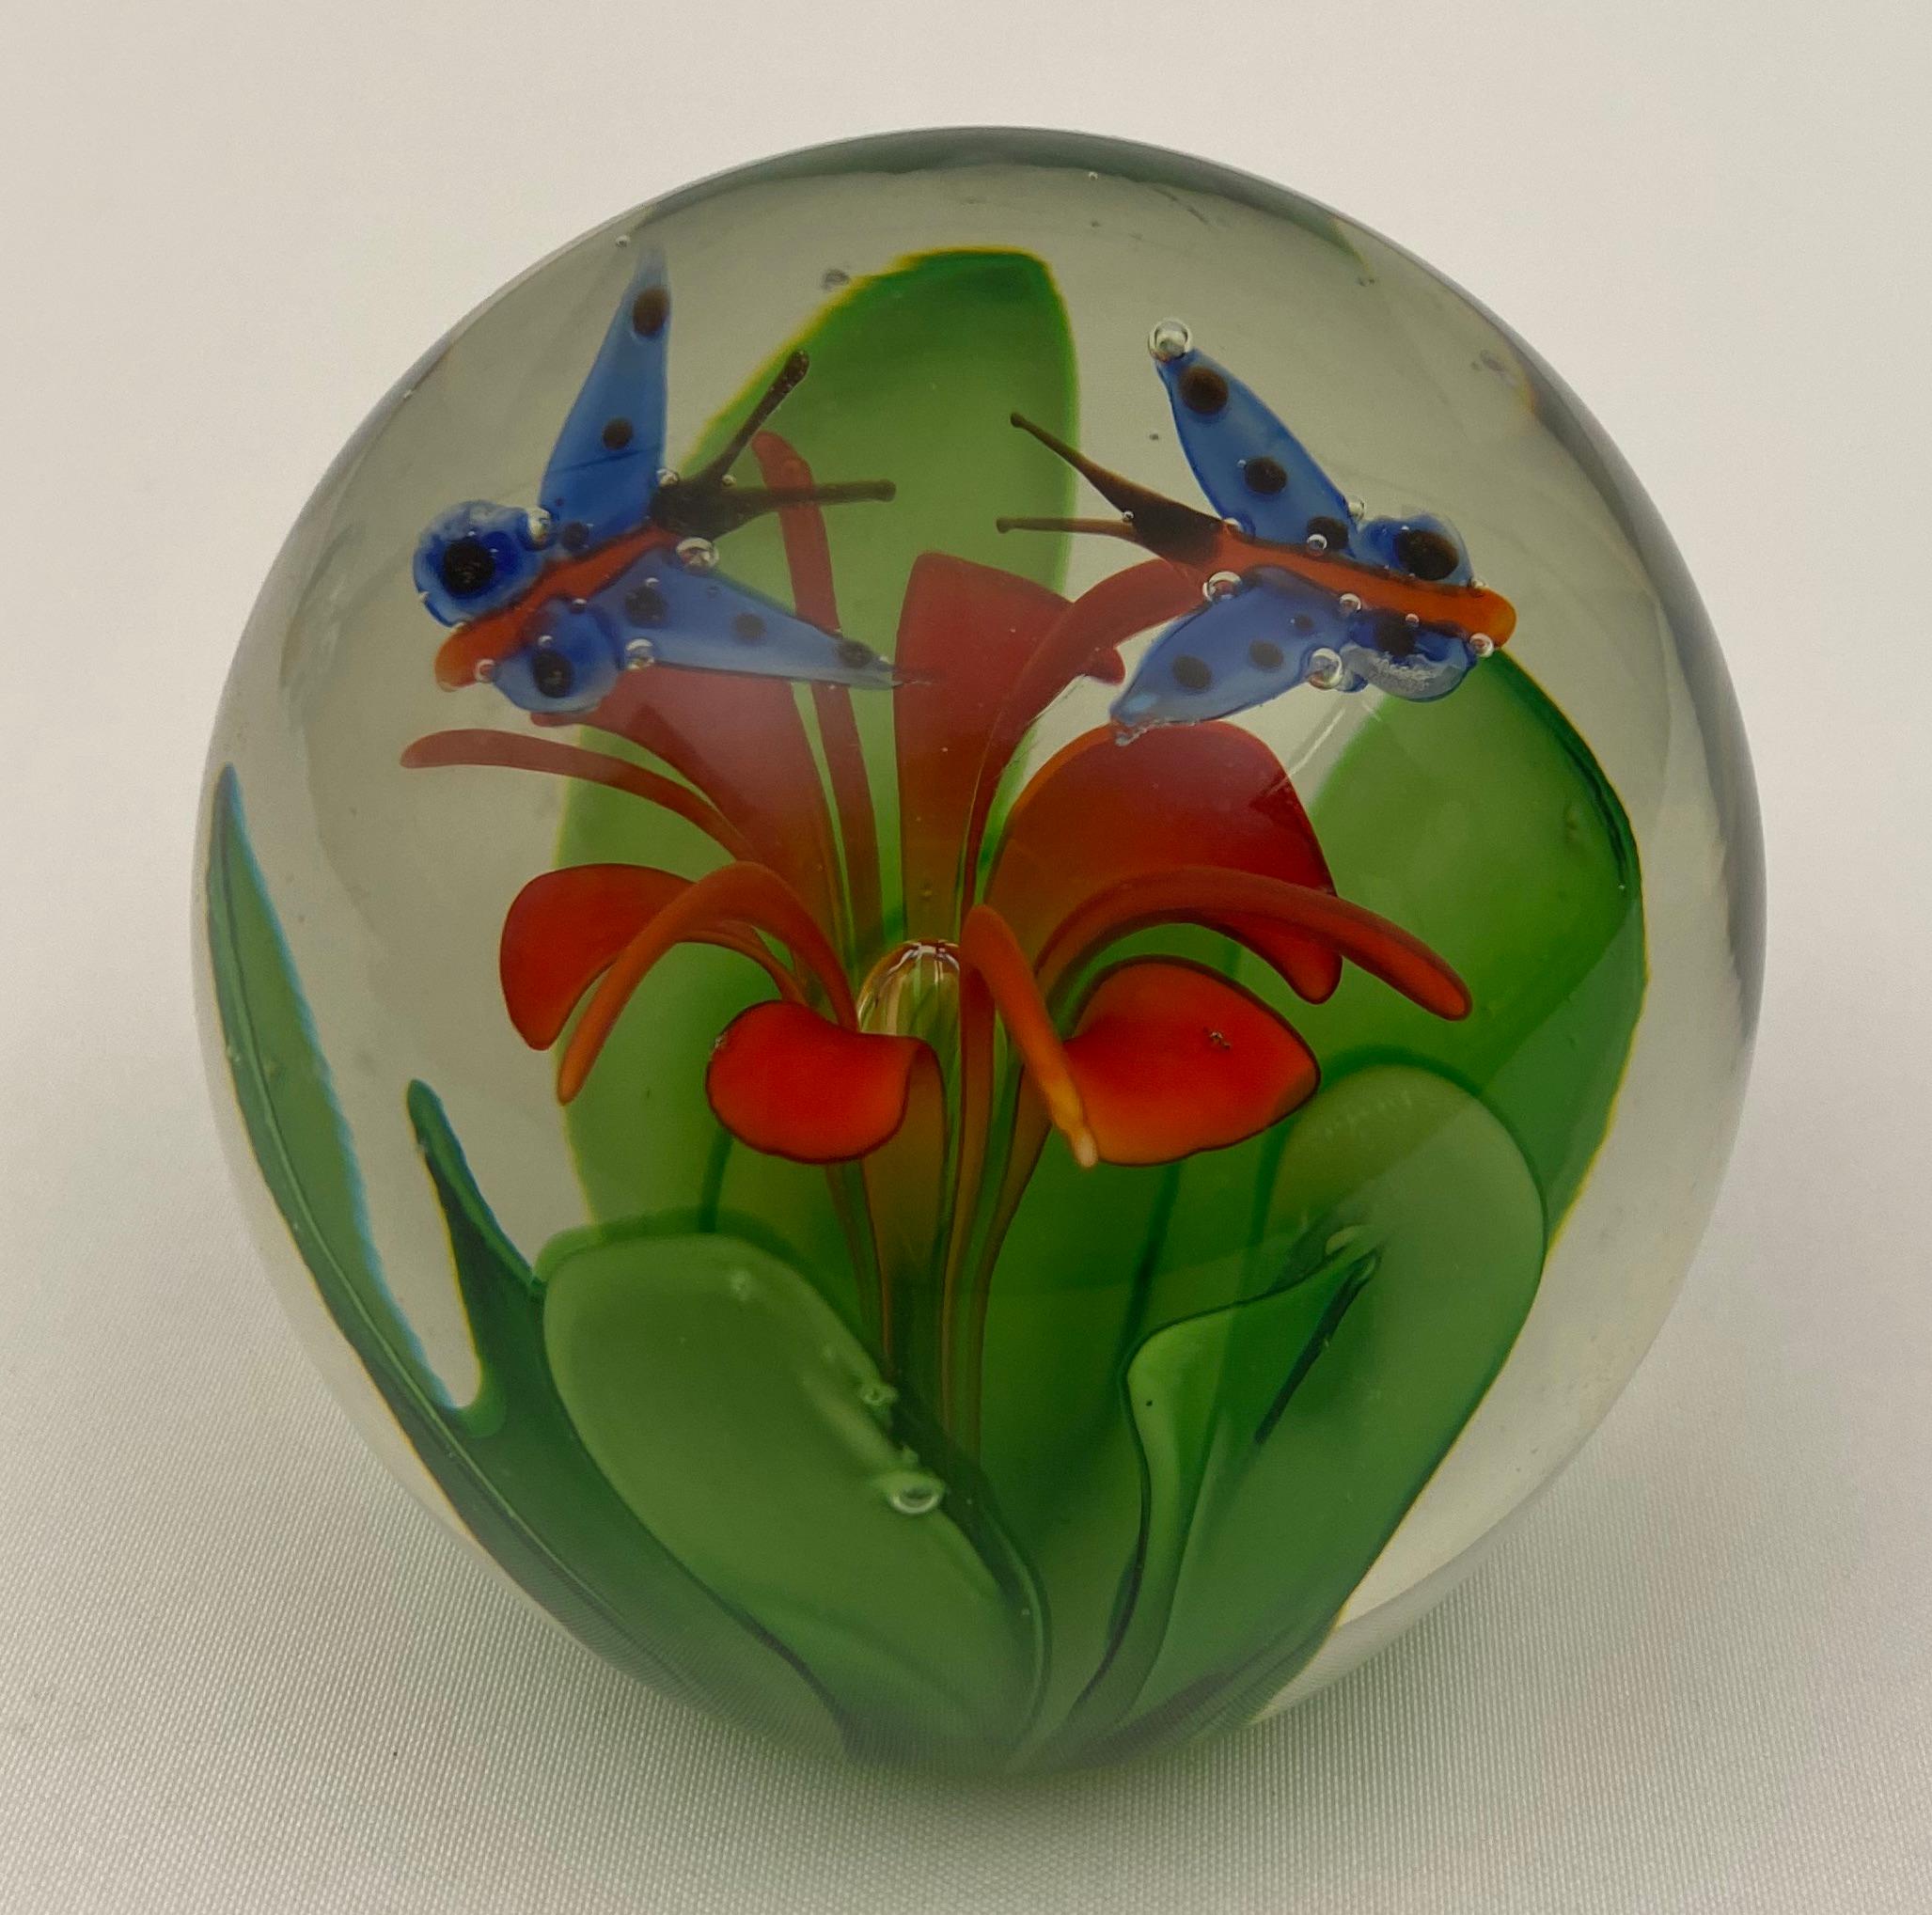 A magnificent limited edition Baccarat Paperweight.  Large and showy with great bright colors of red, blues, green and yellow.

Approximately 3 inches in diameter by 3 inches in height

Will enhance any desk or table. 